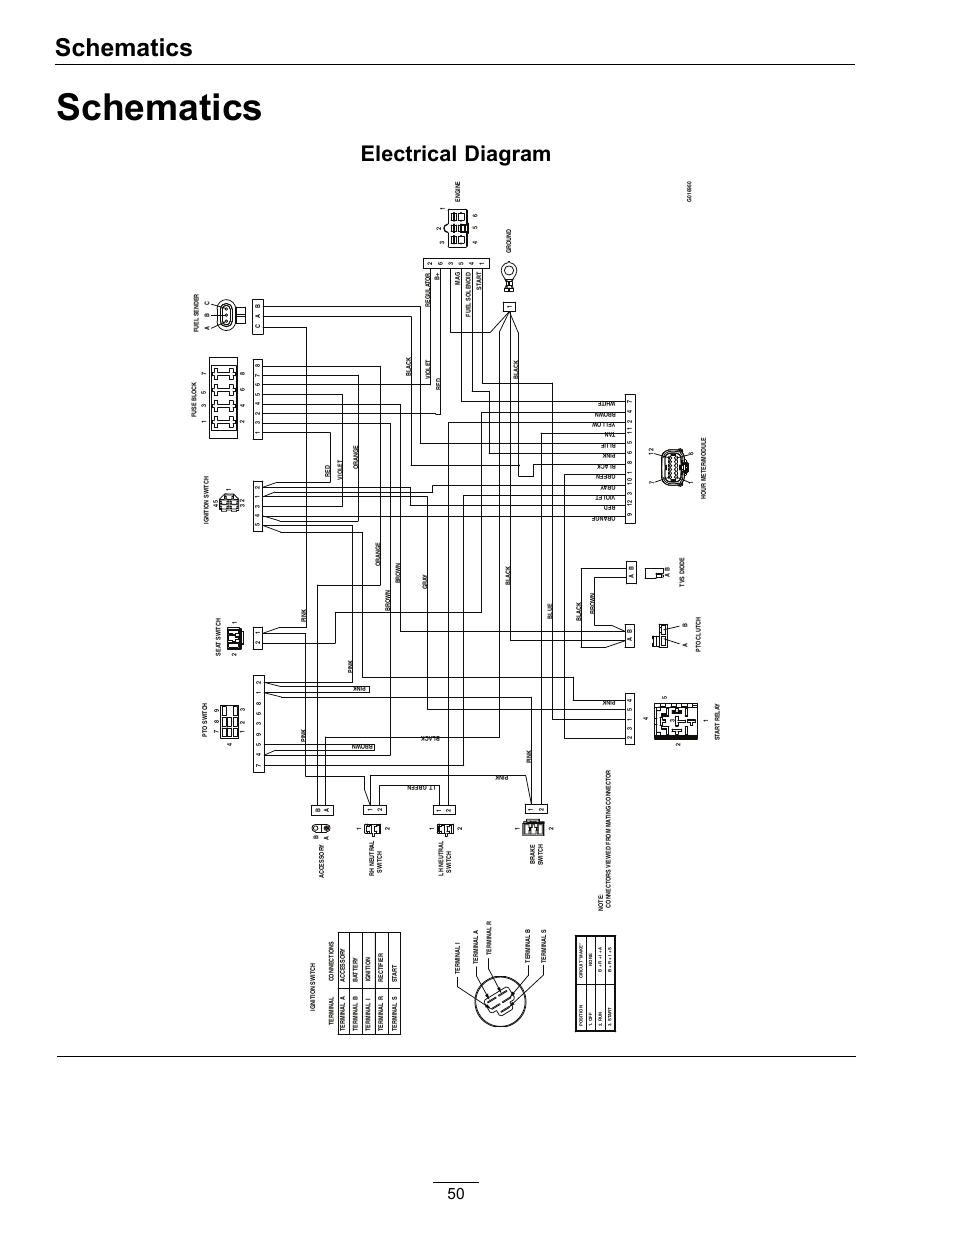 wiring diagram poe injector